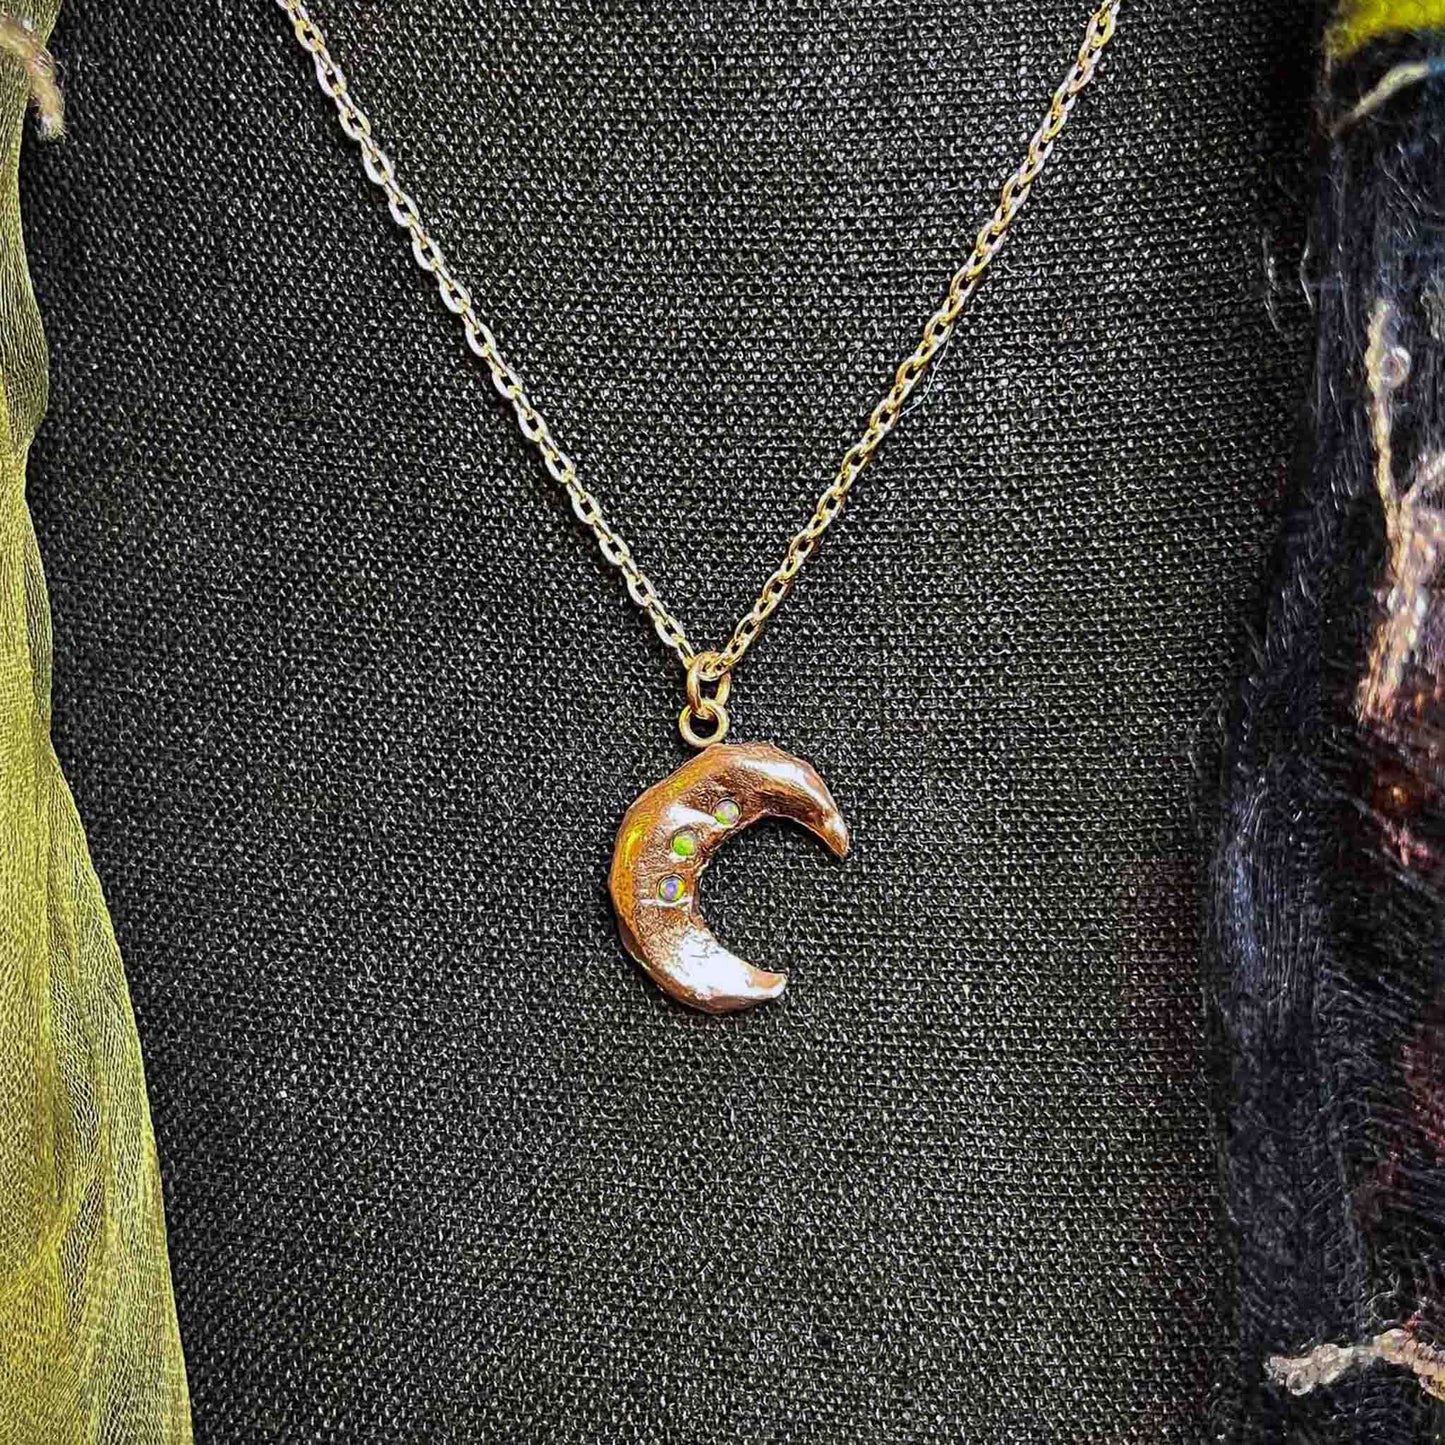 Small Crescent Moon Charm in Copper with Accent Opals